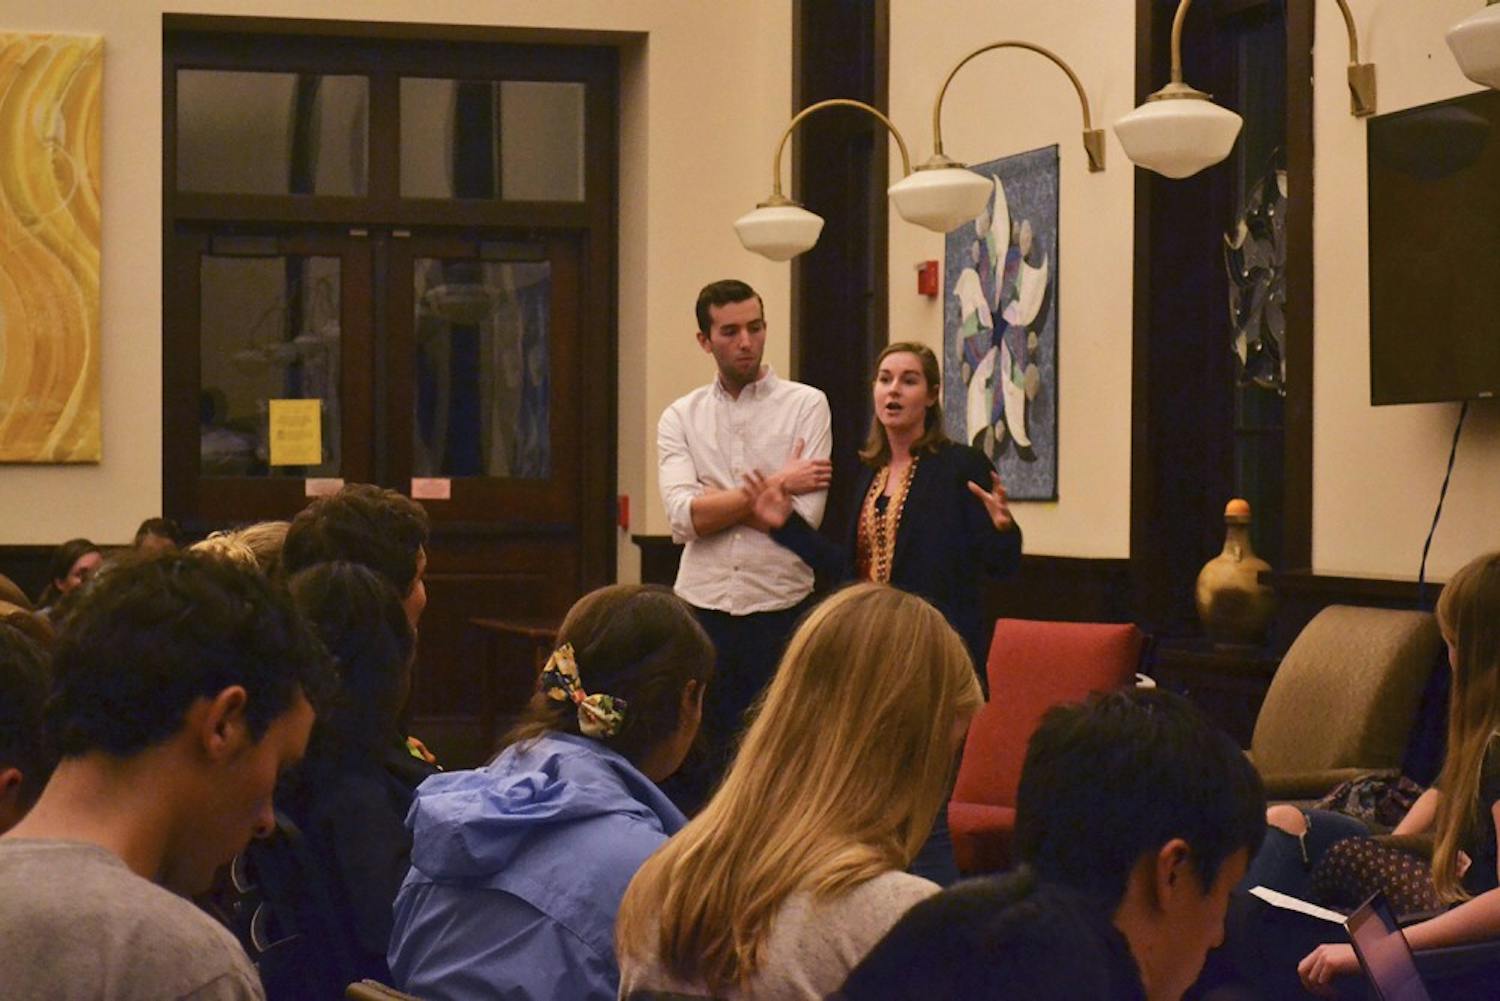 Noah Ponton (left) and Monique Laborde, Campus Y co-president candidates, participate in a forum on Wednesday night.